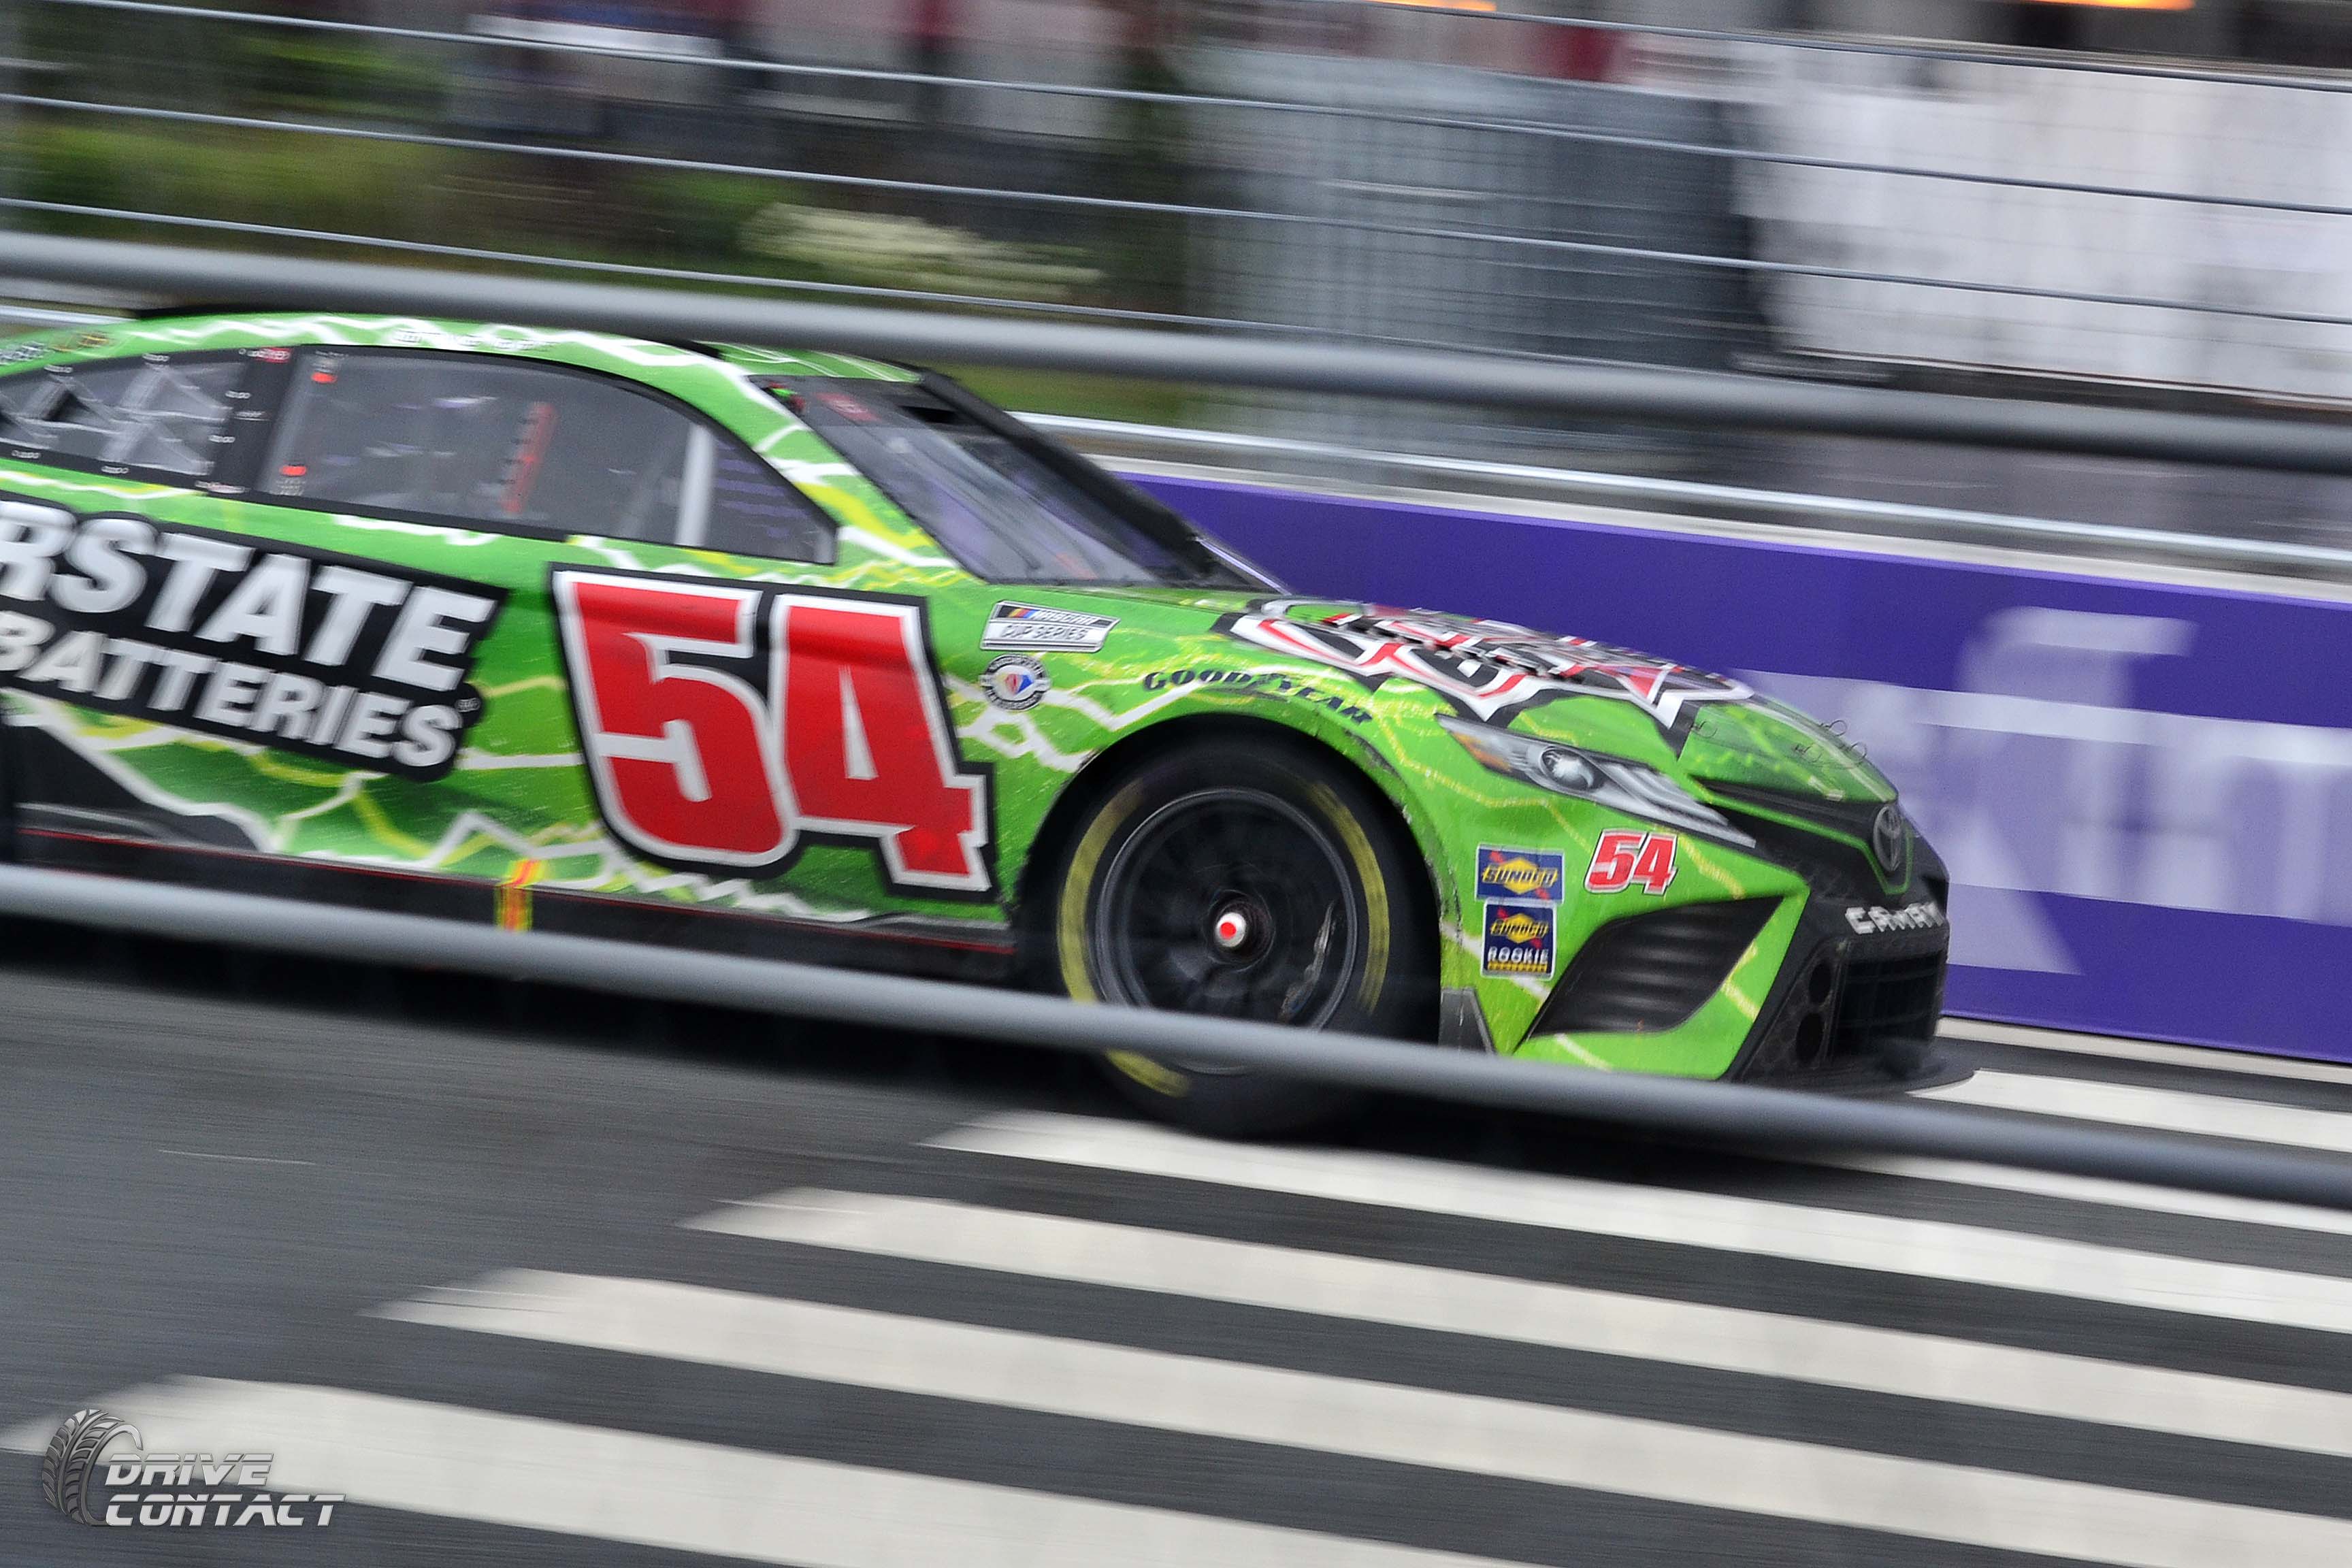 Ty Gibbs will drive the No. 54 Interstate Batteries Toyota